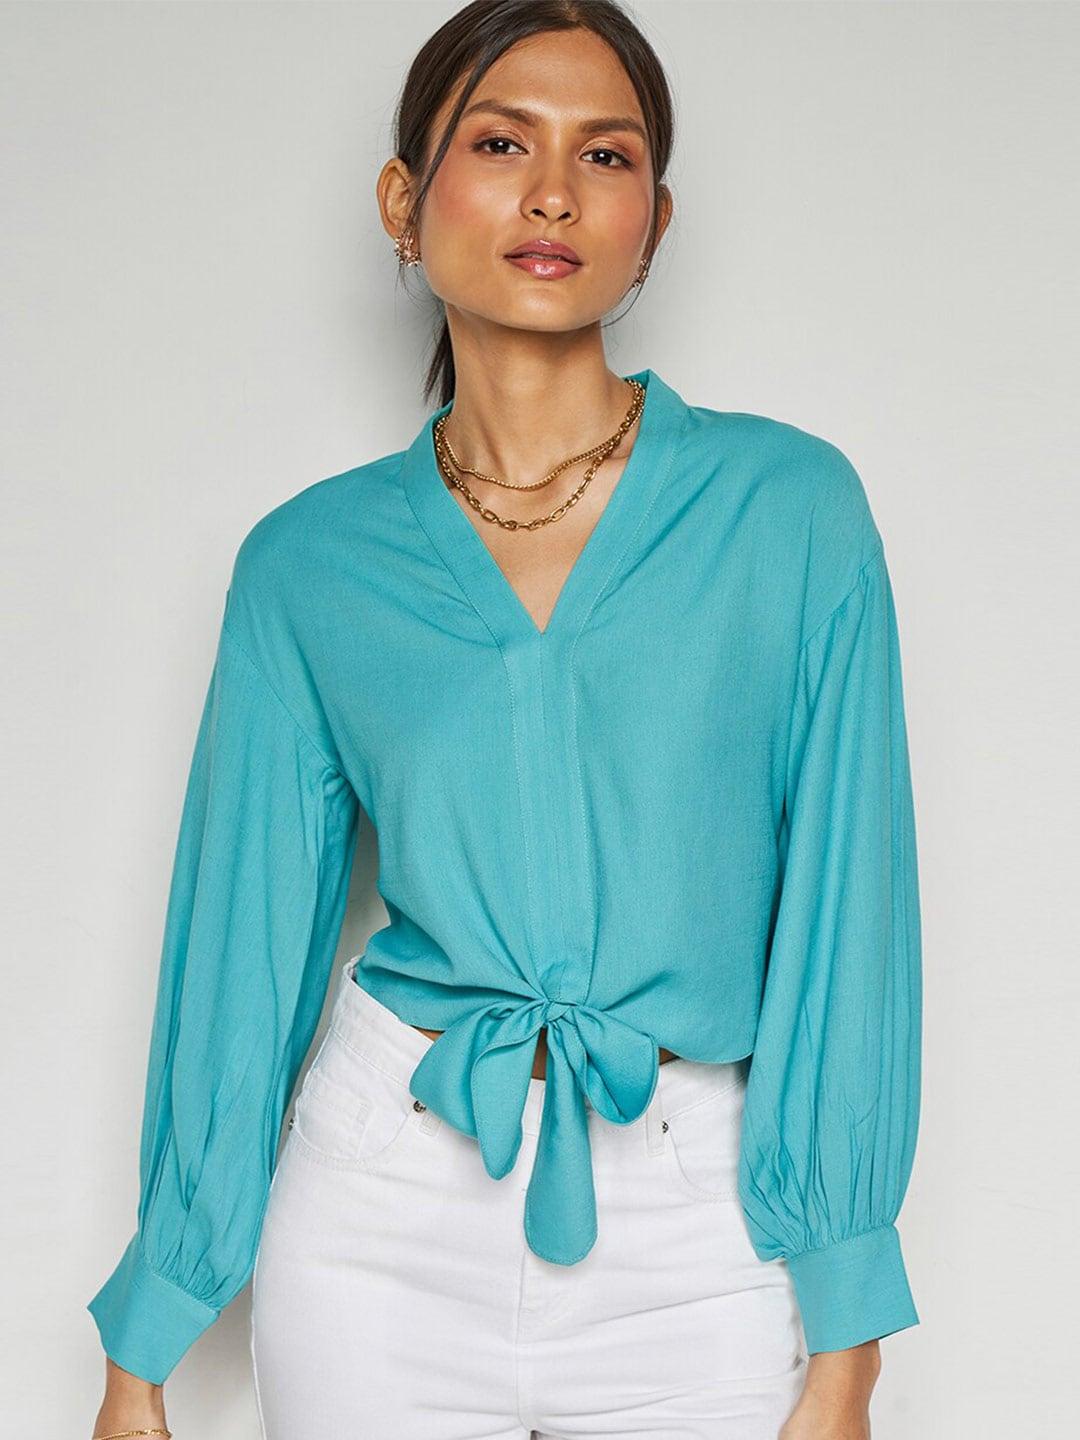 and v-neck tie-up detail shirt style top